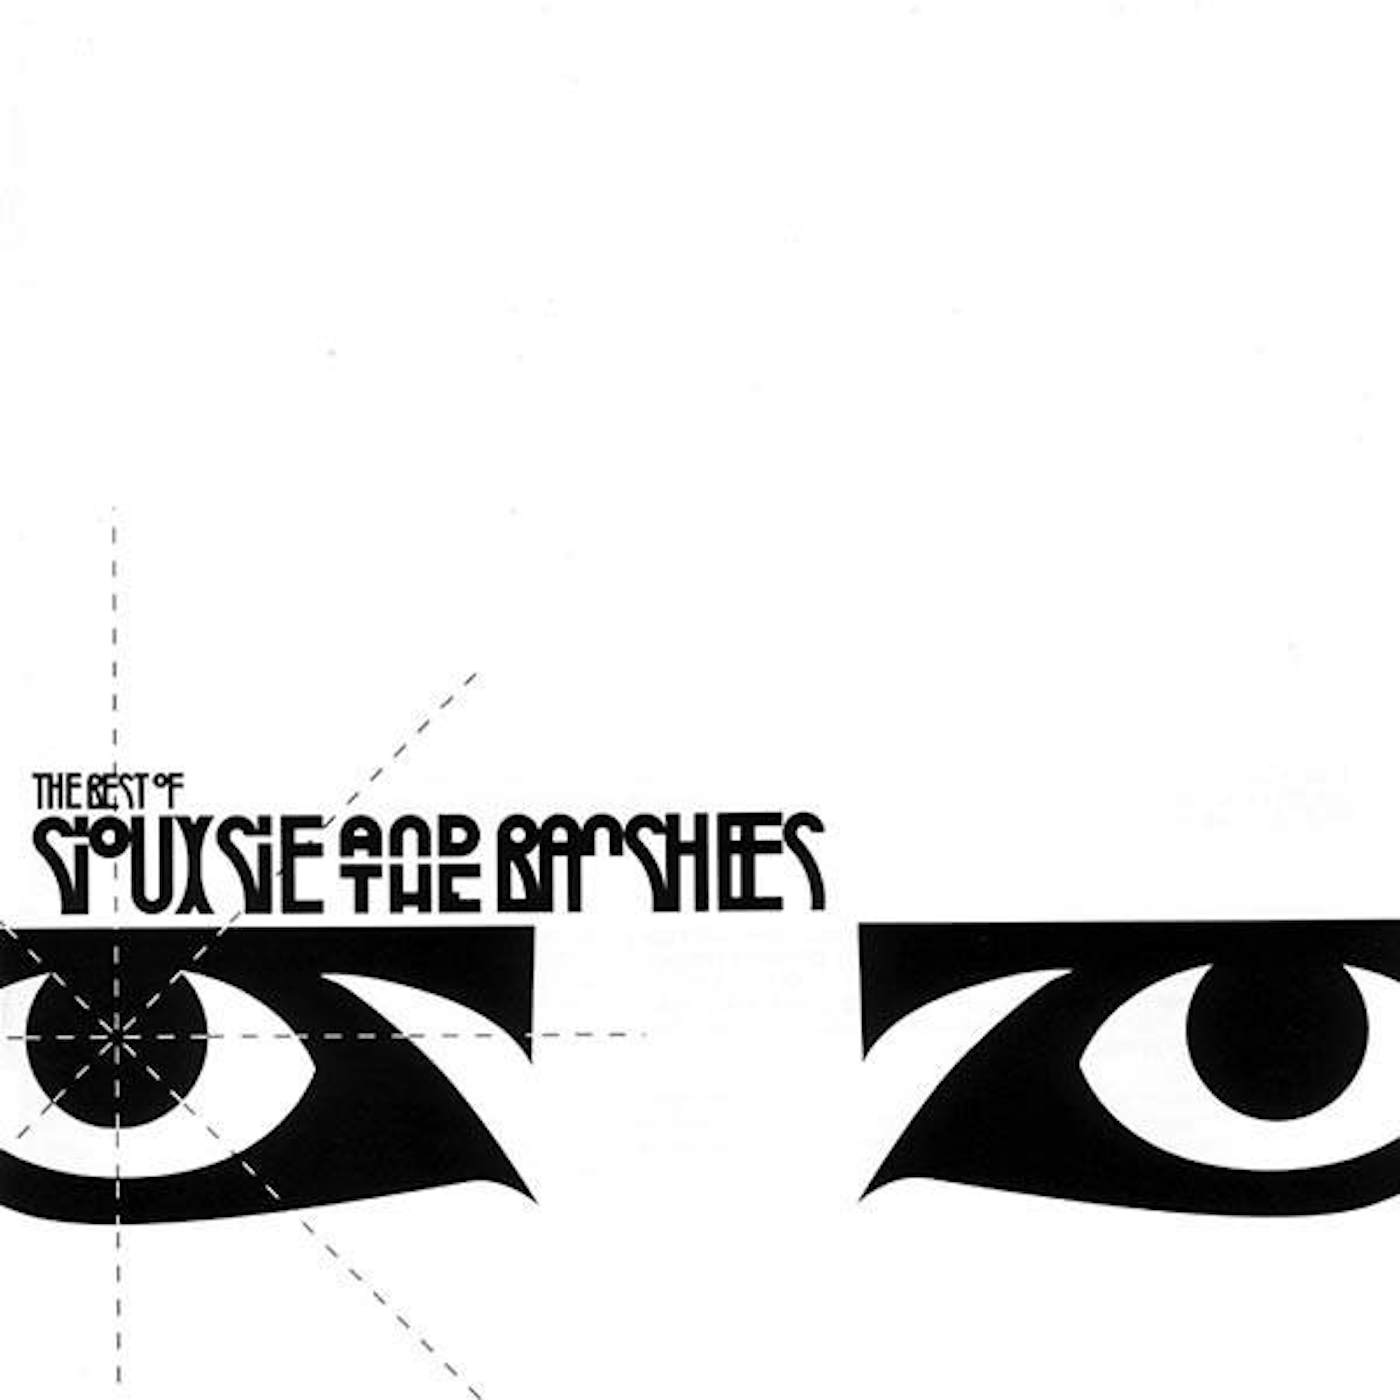 BEST OF Siouxsie and the Banshees CD